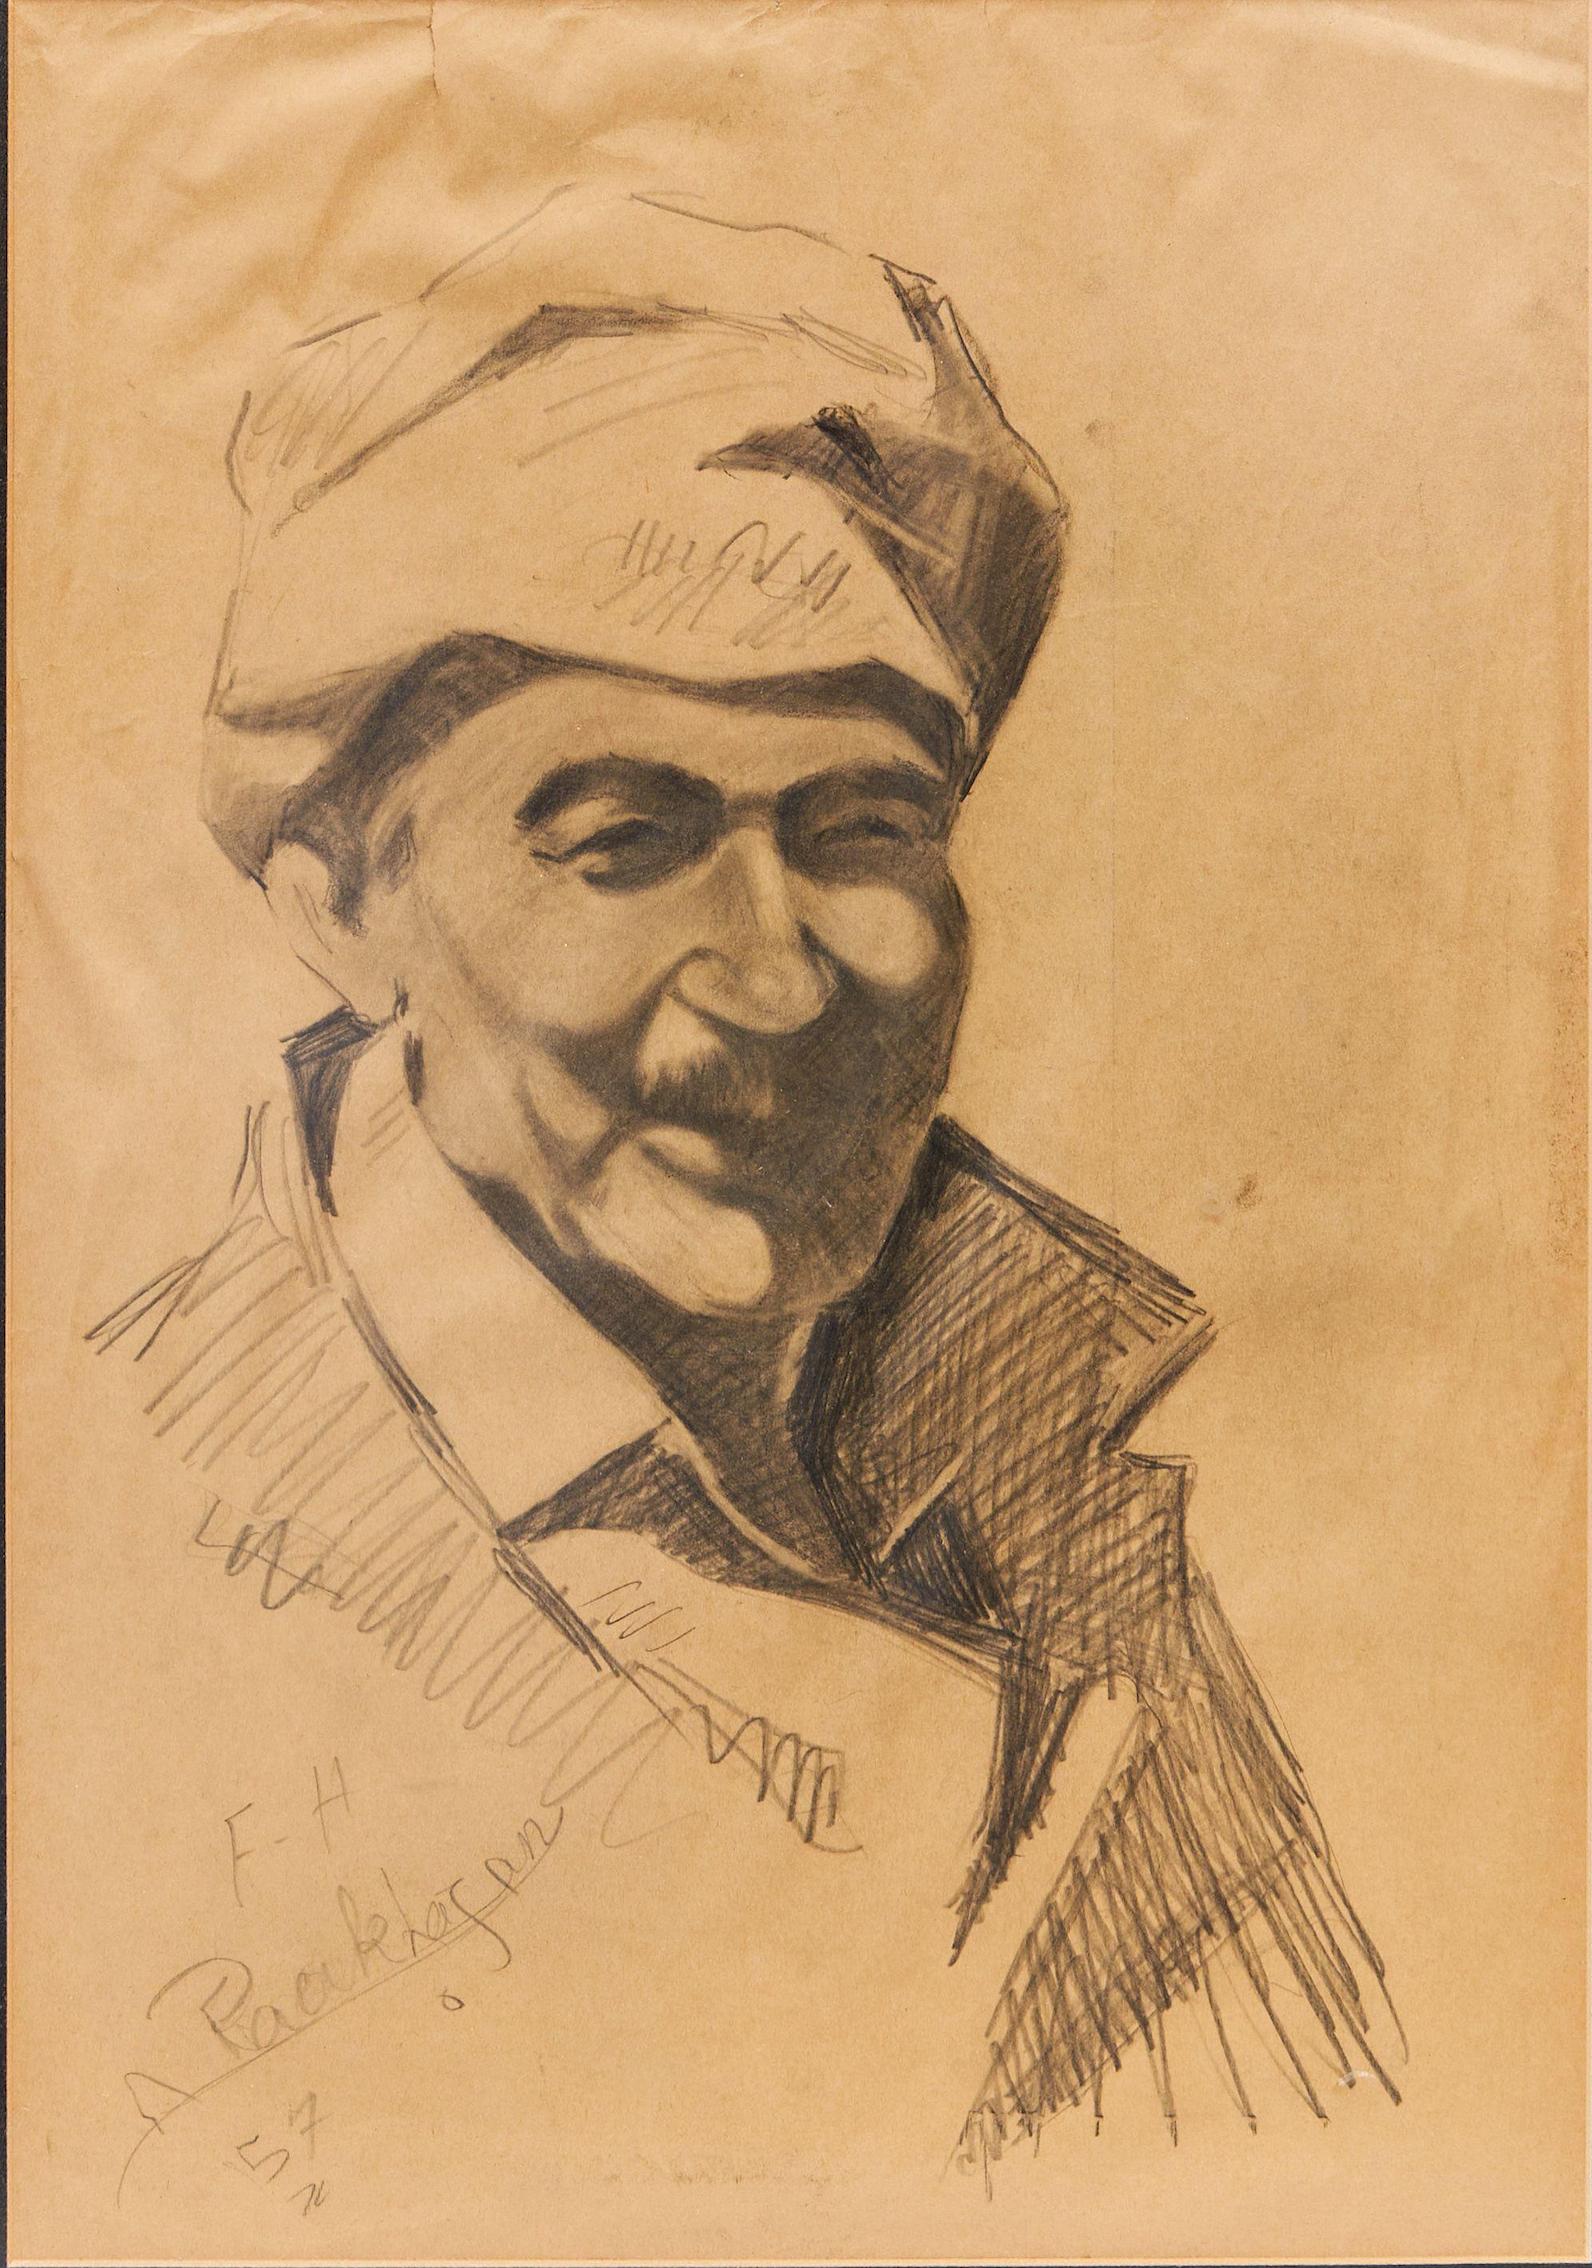 The artwork is set in a rich brown paper, providing a warm and earthy tone to the overall composition. Executed with a precise black pencil, the portrait captures the essence of an Iraqi Kurdish man, who is the central subject of the piece. This